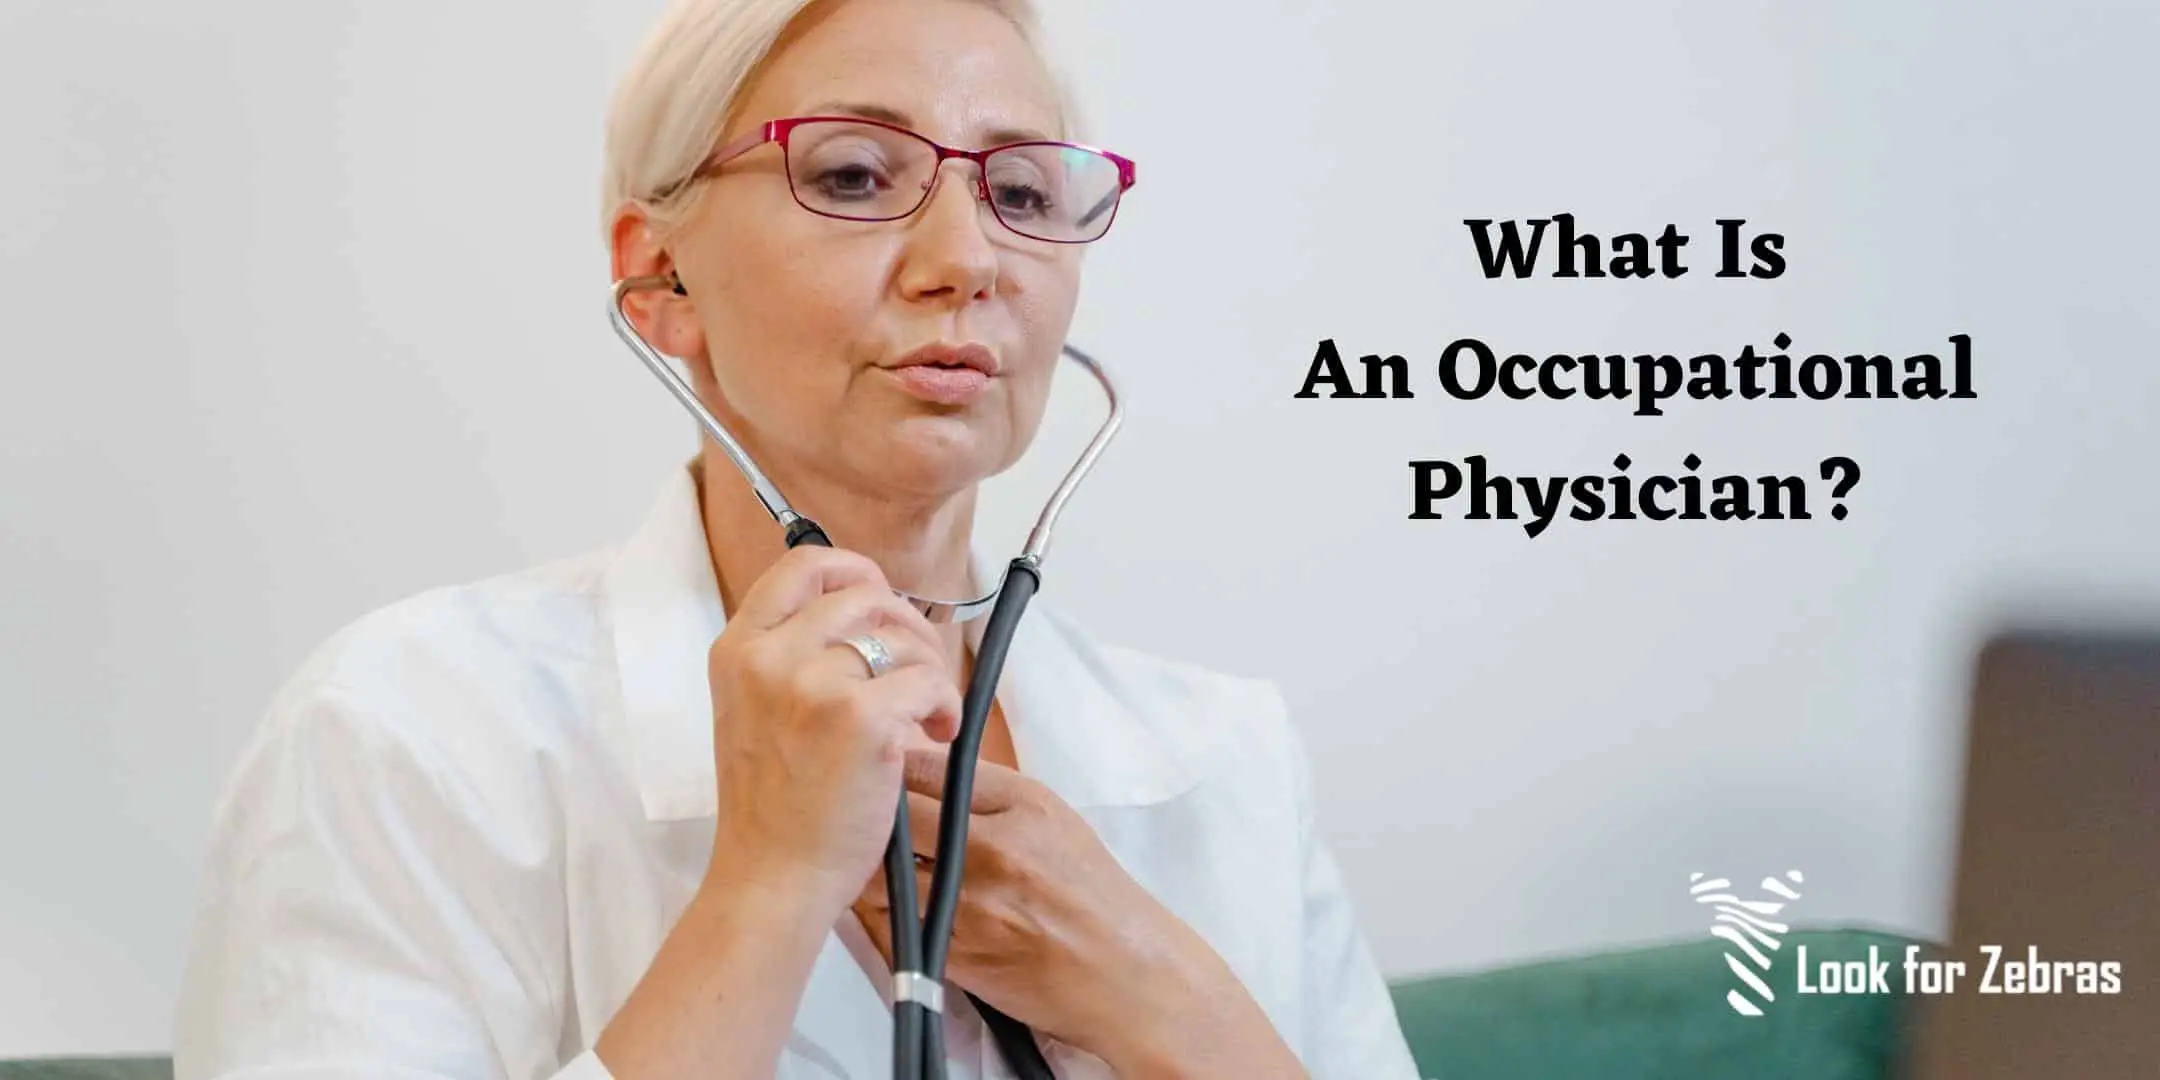 What Is An Occupational Physician